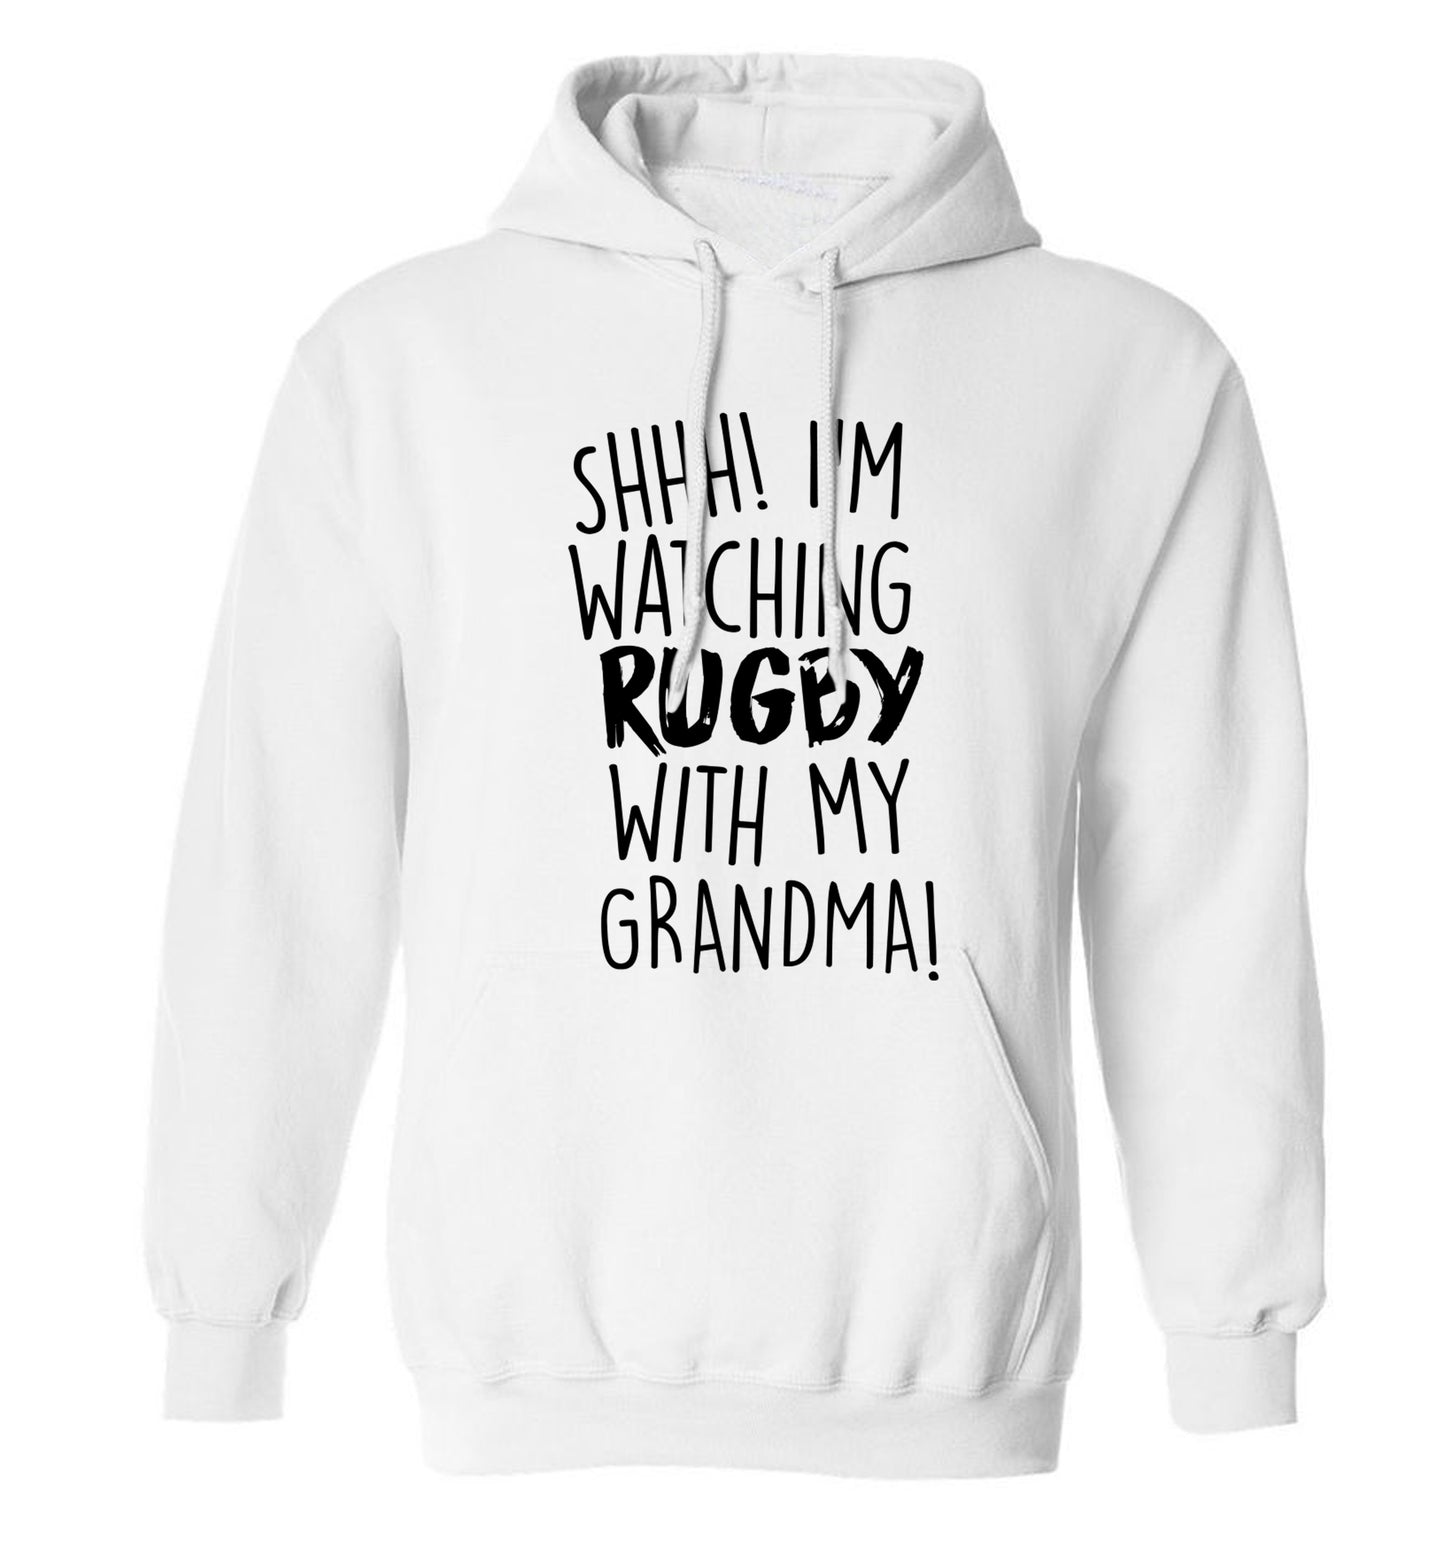 Shh I'm watching rugby with my grandma adults unisex white hoodie 2XL